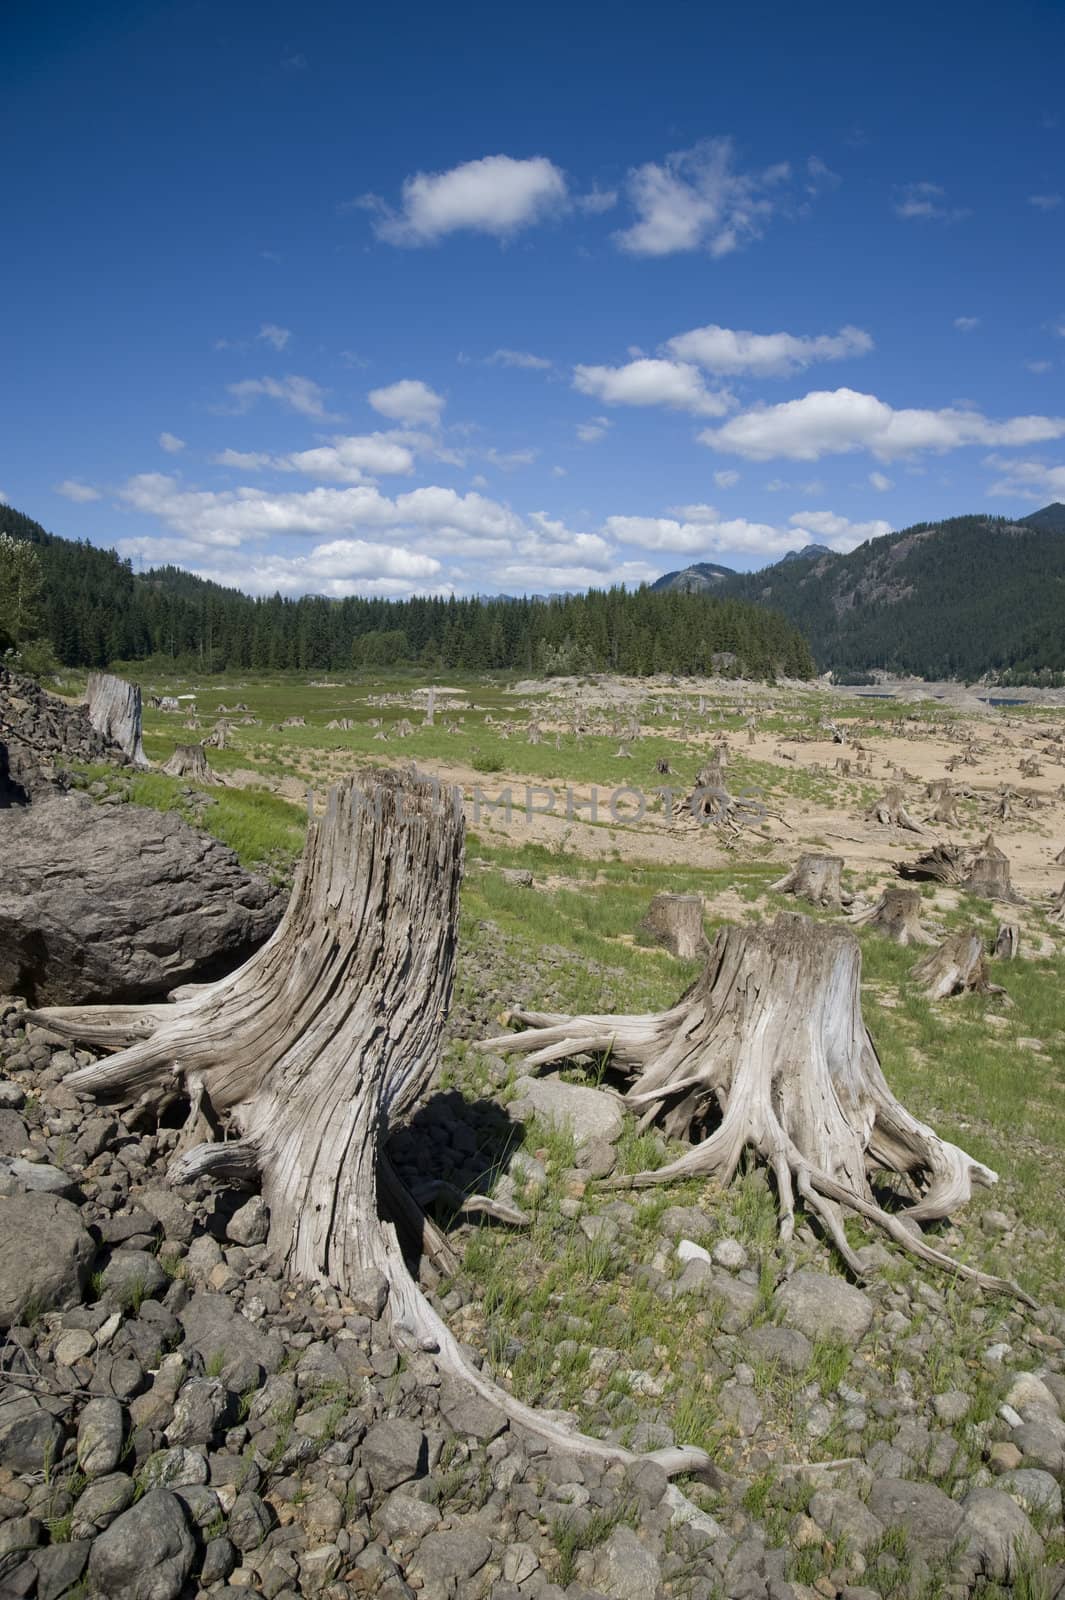 Clear cut forest area near Snoqualmie Pass, Washington State, US by rongreer